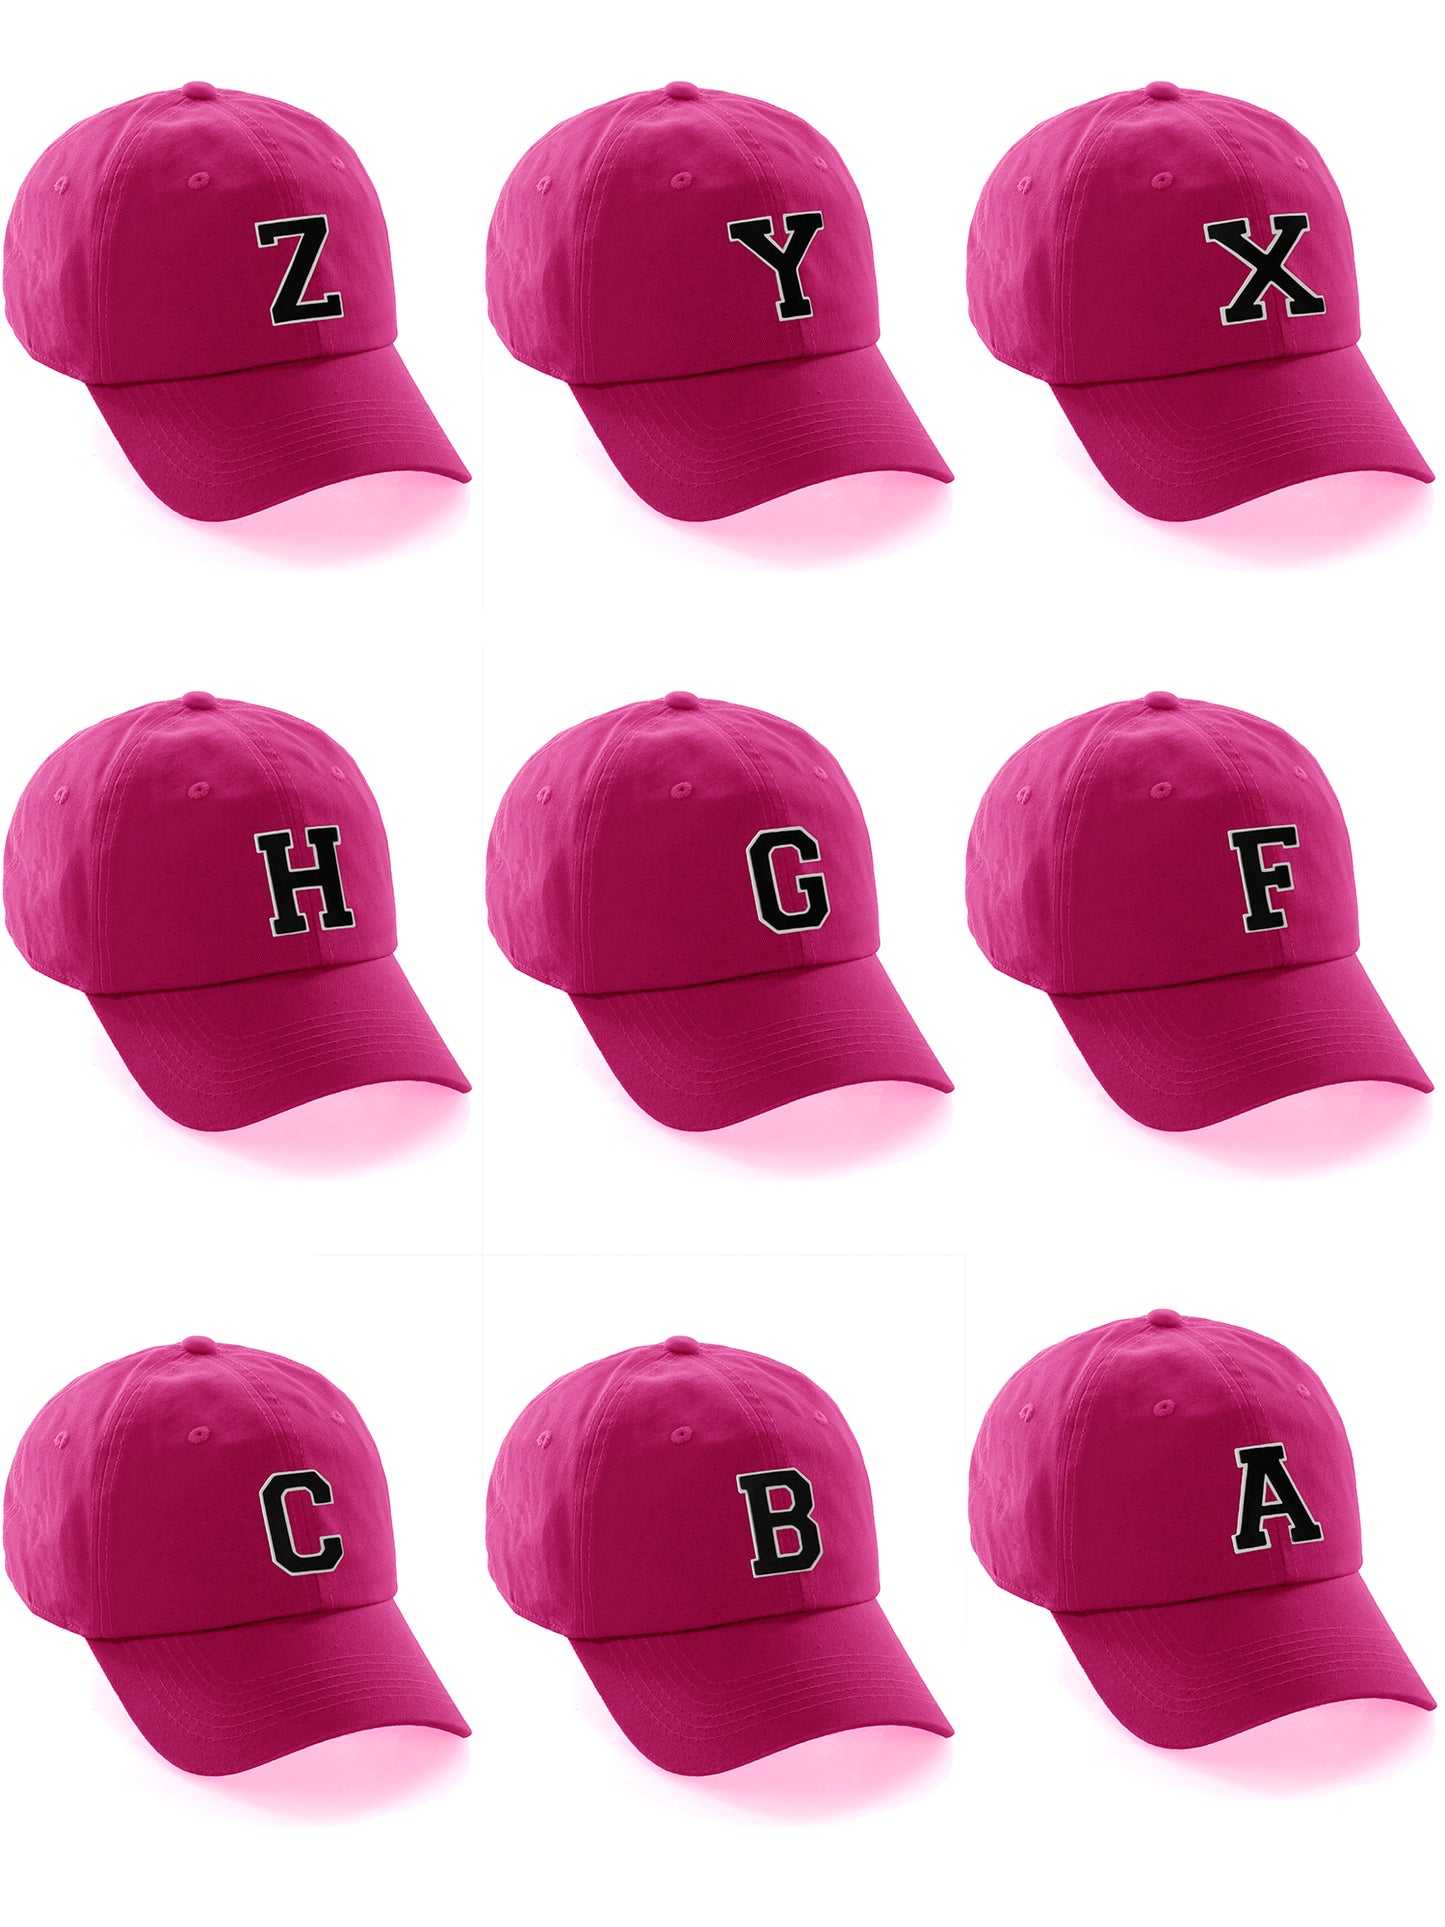 I&W Hatgear Customized Letter Initial Baseball Hat A to Z Team Colors, Hot Pink Hat Wh Blck